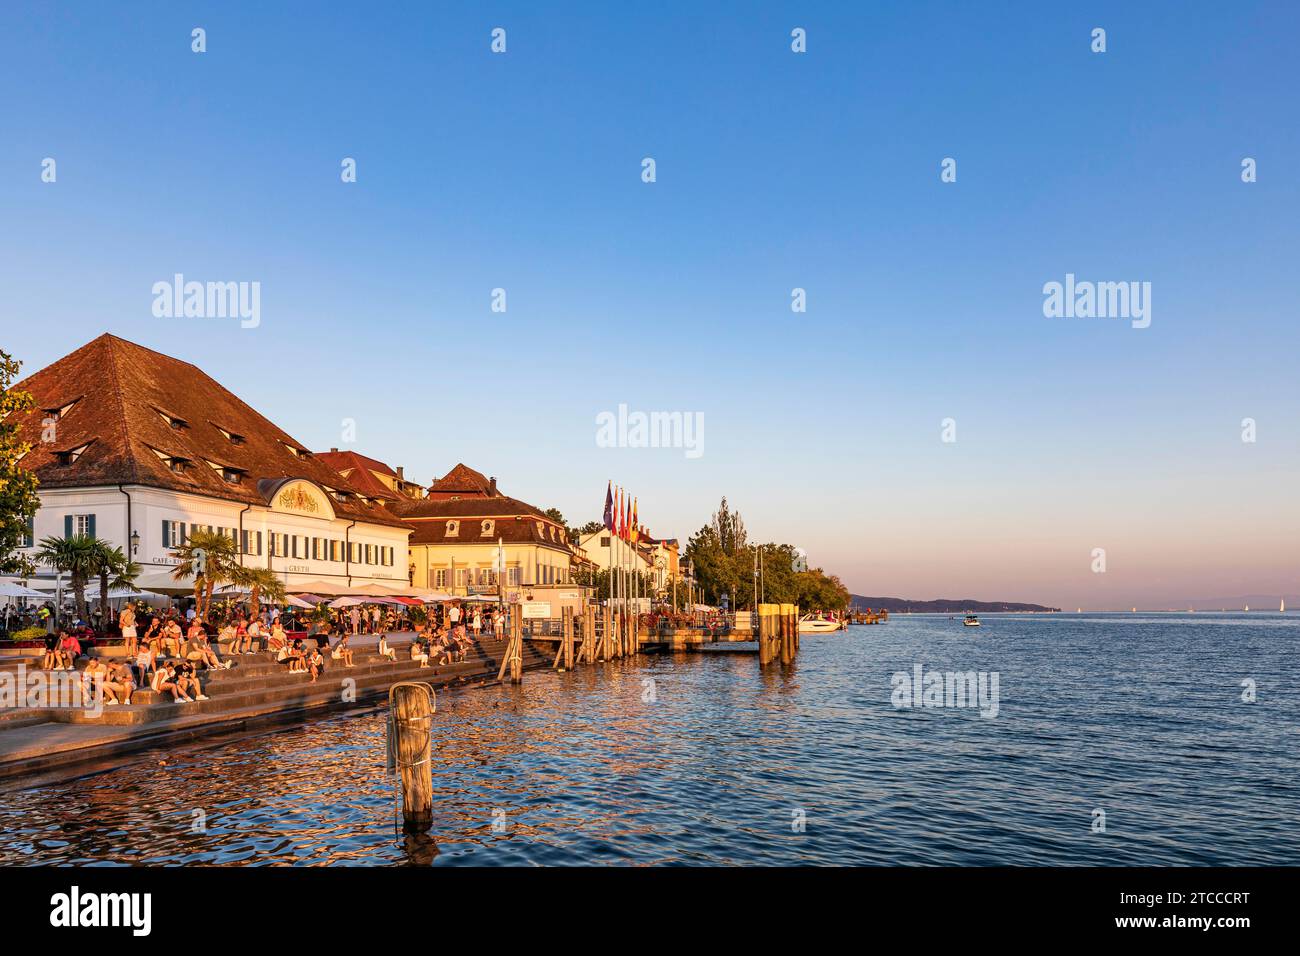 People on the lakeside promenade and Restaurant Markthalle Greth, Ueberlingen, Lake Constance, Baden-Wuerttemberg, Germany Stock Photo